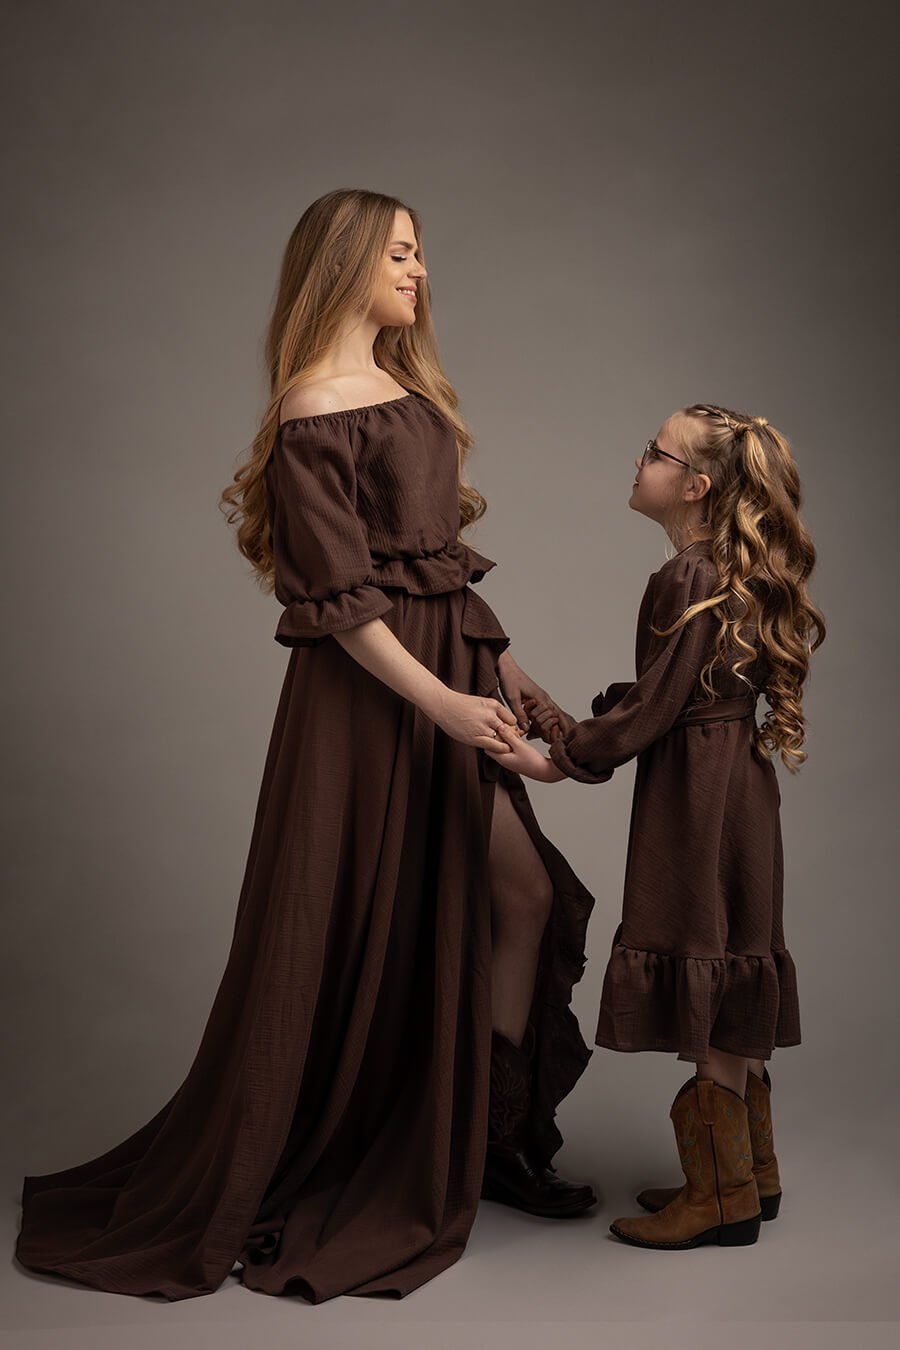 blond mom and kid are posing in a studio during a boho western chic photoshoot. they are both wearing chocolate color boho long dresses and boots to match the western style.